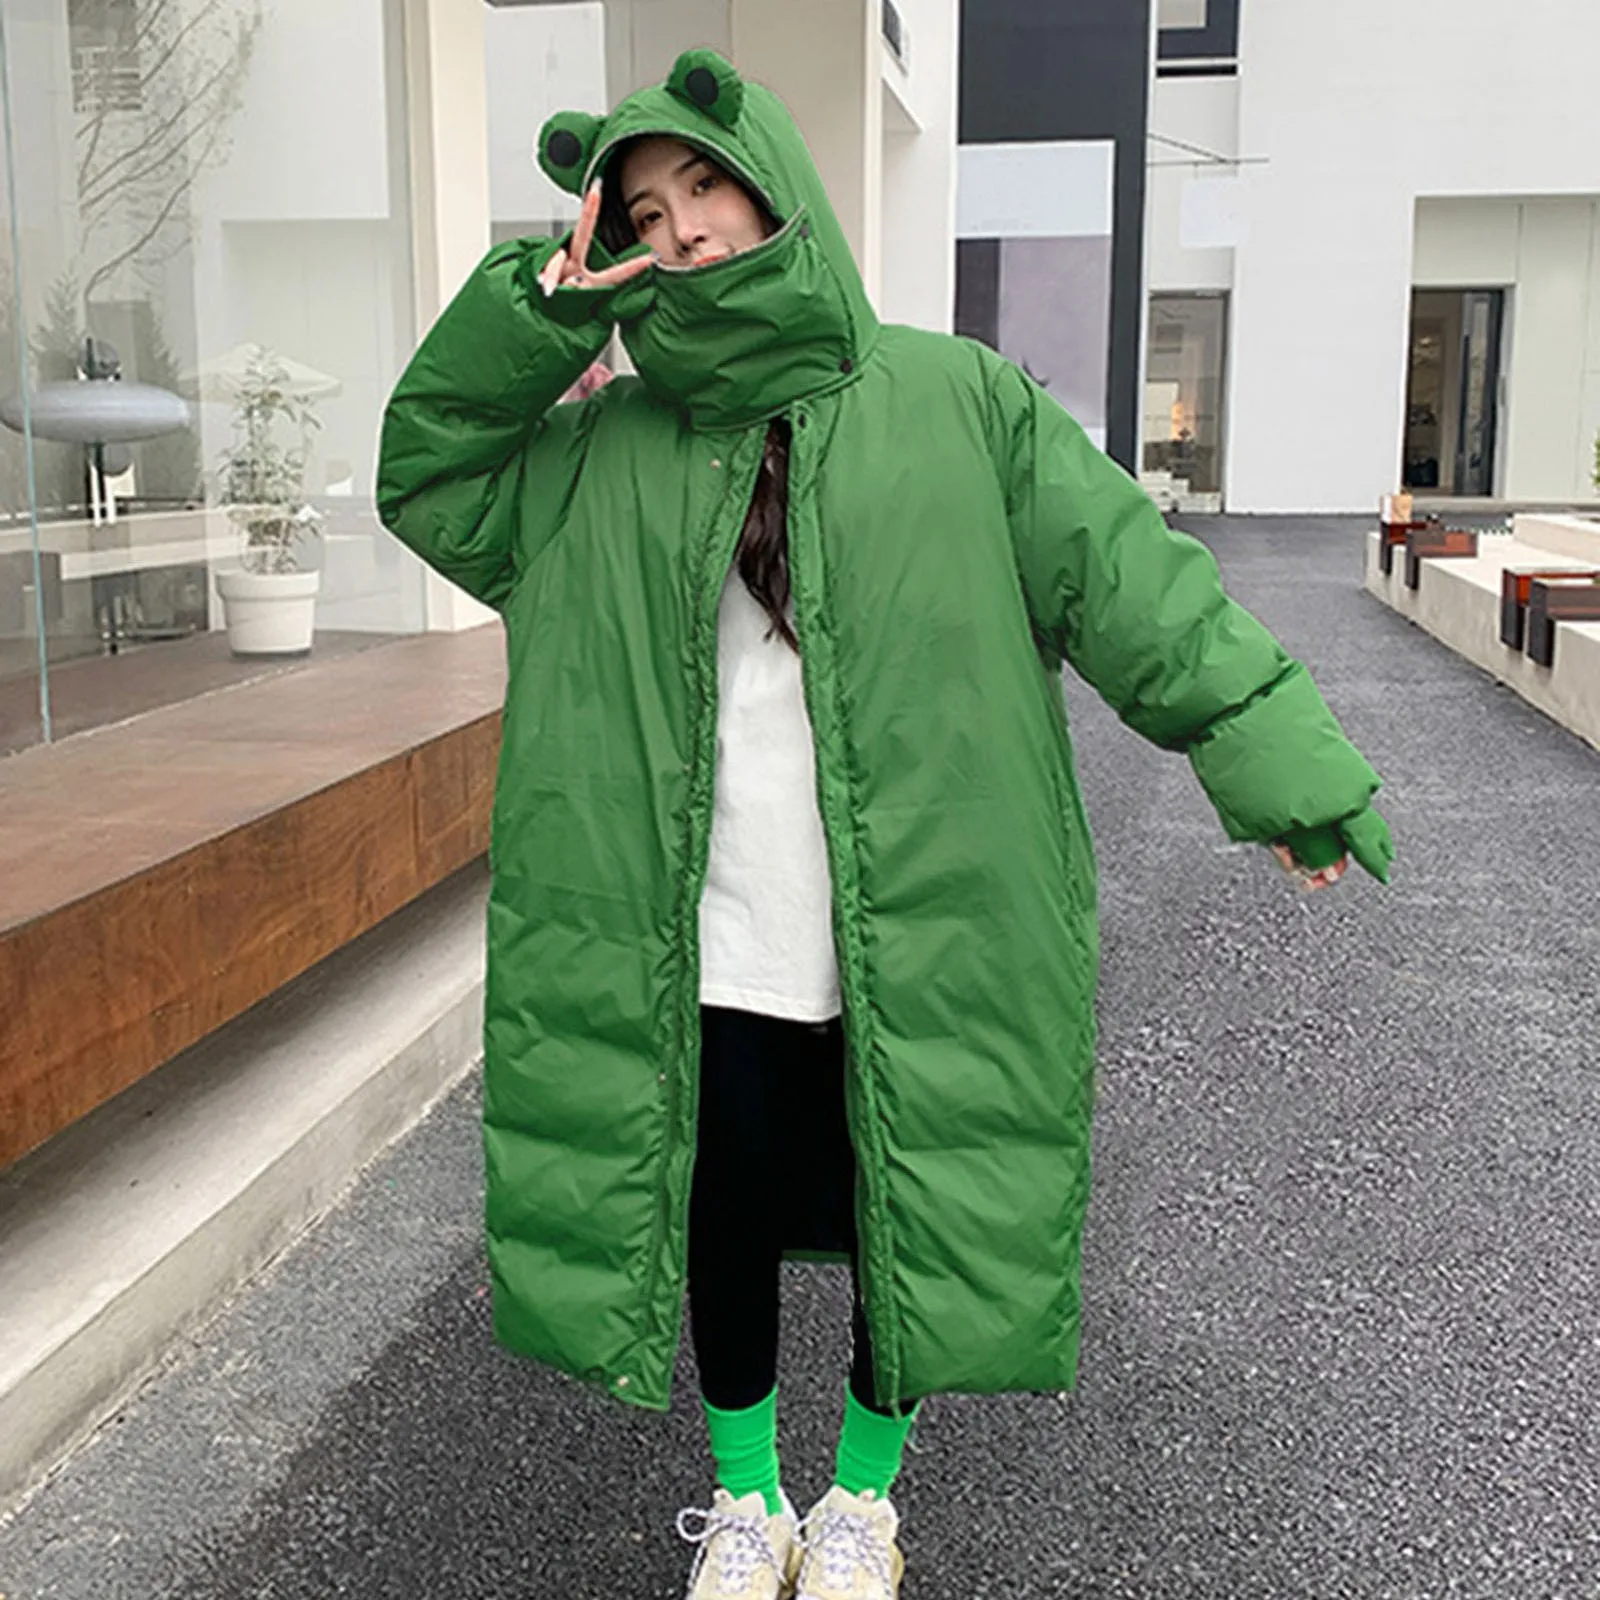 Ugly Funny Fog Jacket Womens Autumn Winter Green Parkas Hoodies Slim Outdoor Padded Blazer Korean Doll Cosplay Chaquetas Mujer brown trout 3d all over print crewneck hoodies sweatshirts zipper shorts outdoor vocation streetwear unisex clothing